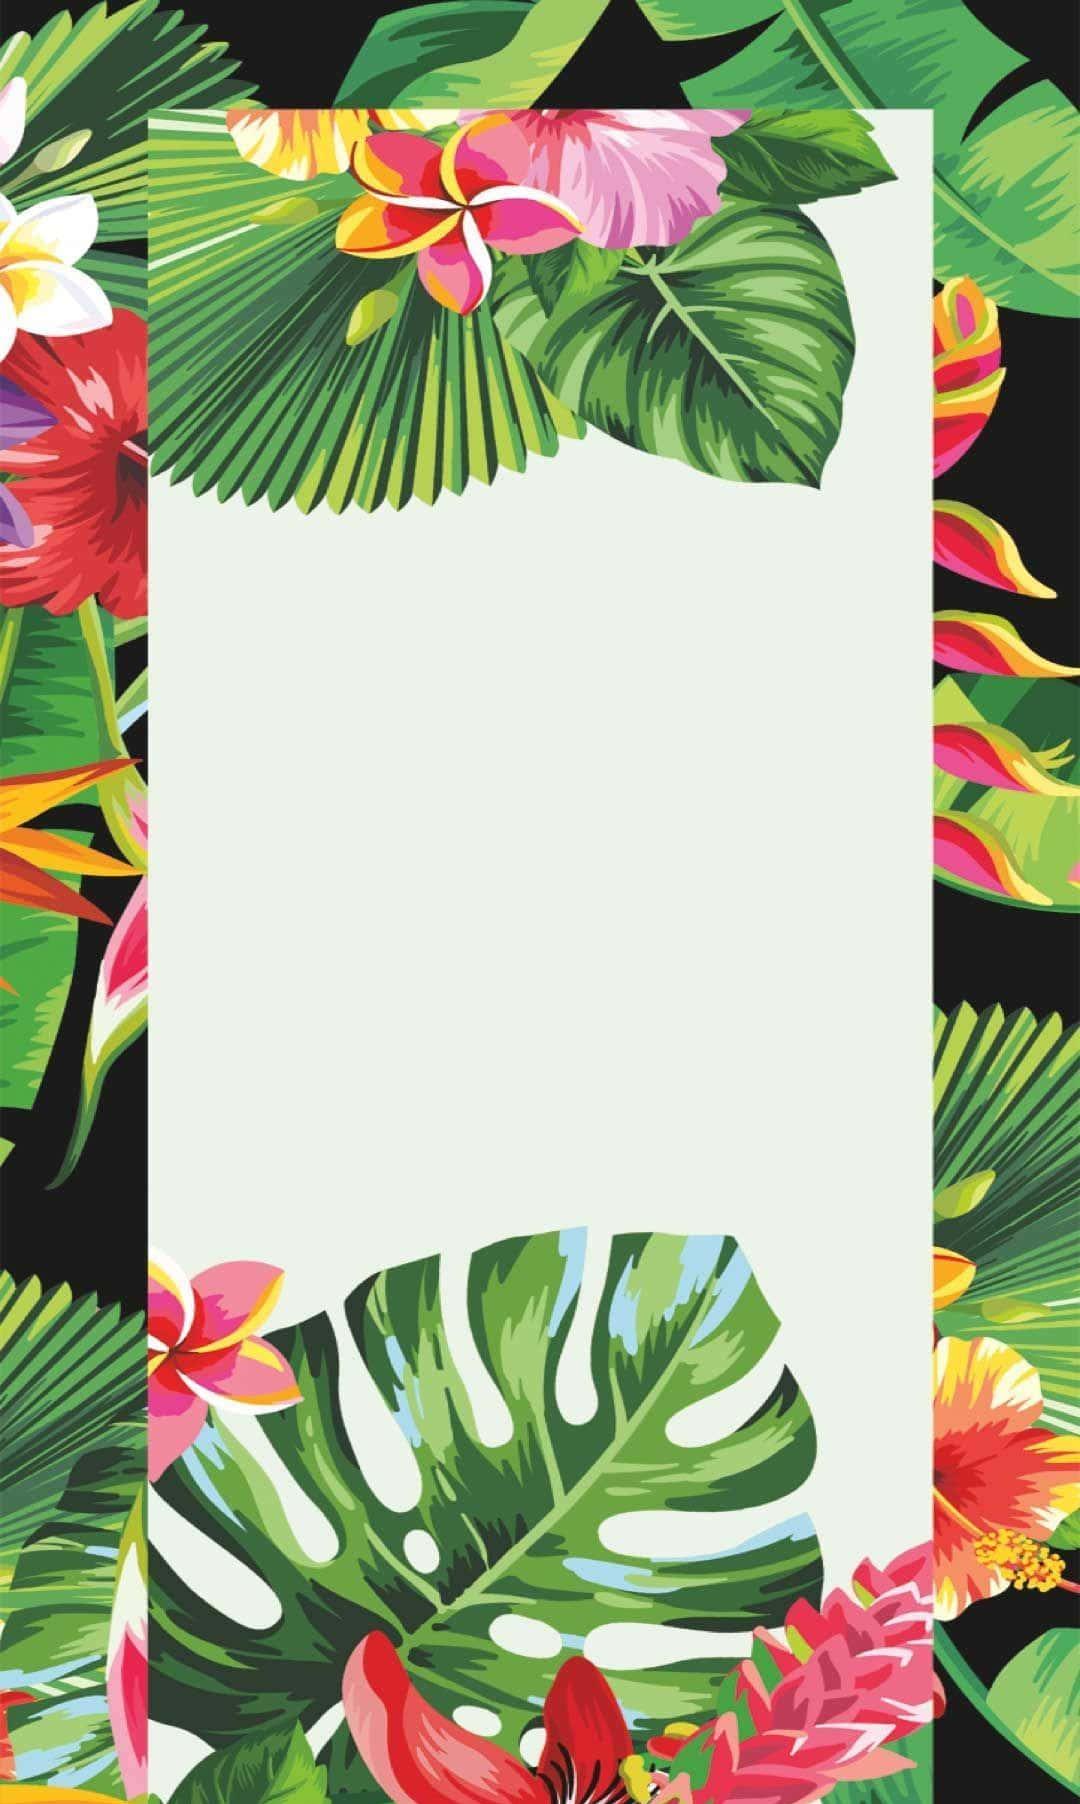 An Exotic Tropical Paradise Is Aesthetic For Any